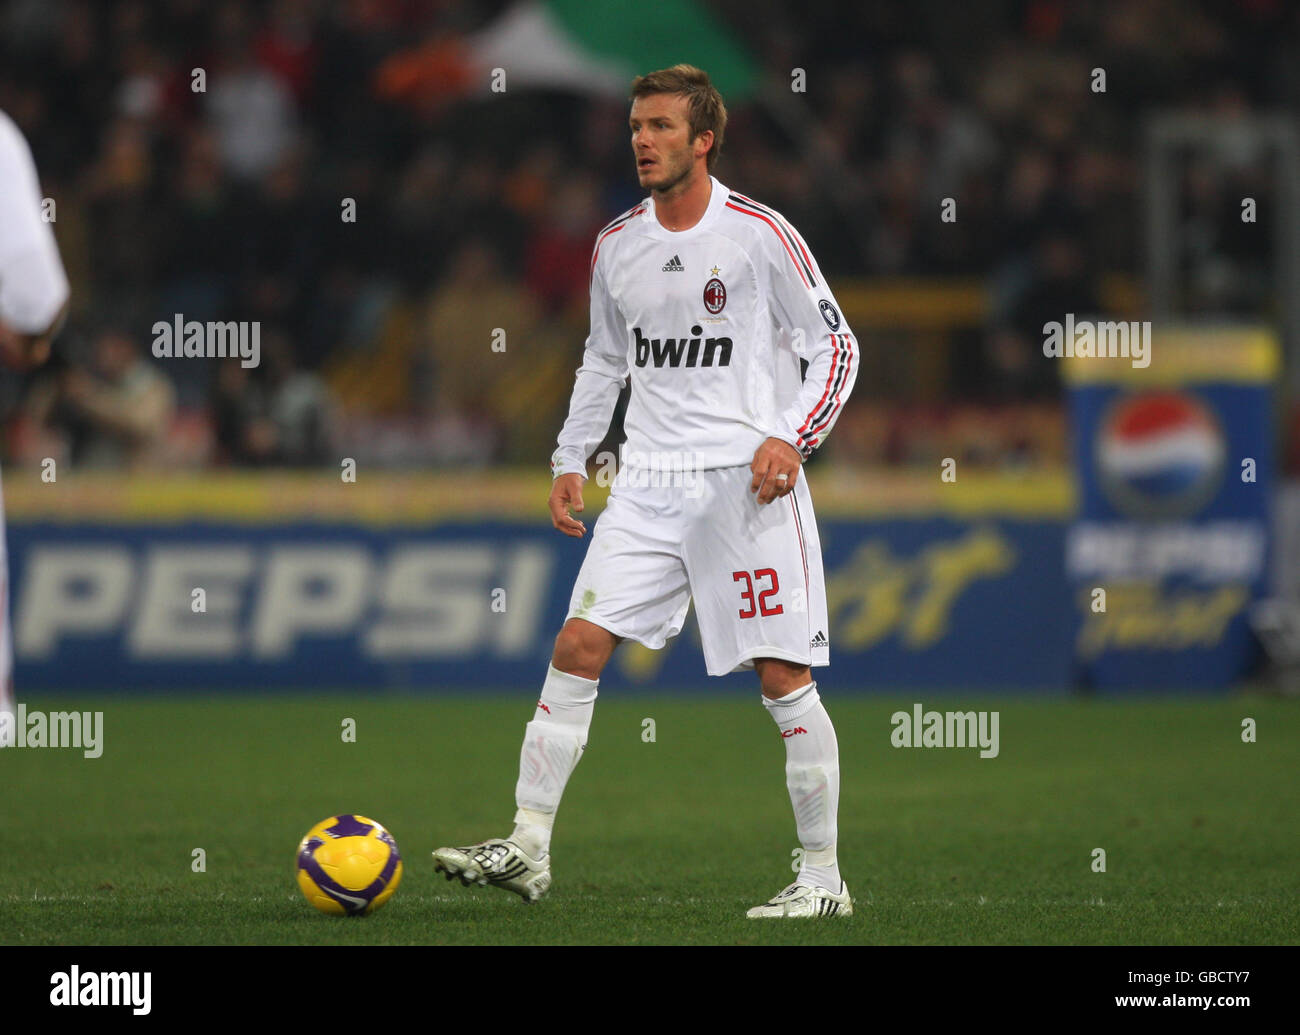 AC Milan's David Beckham during his debut against Roma in Italian Serie A game at the Olympic Stadium, Rome, Sunday 11 January 2009: Photo Nick Potts/PA Stock Photo